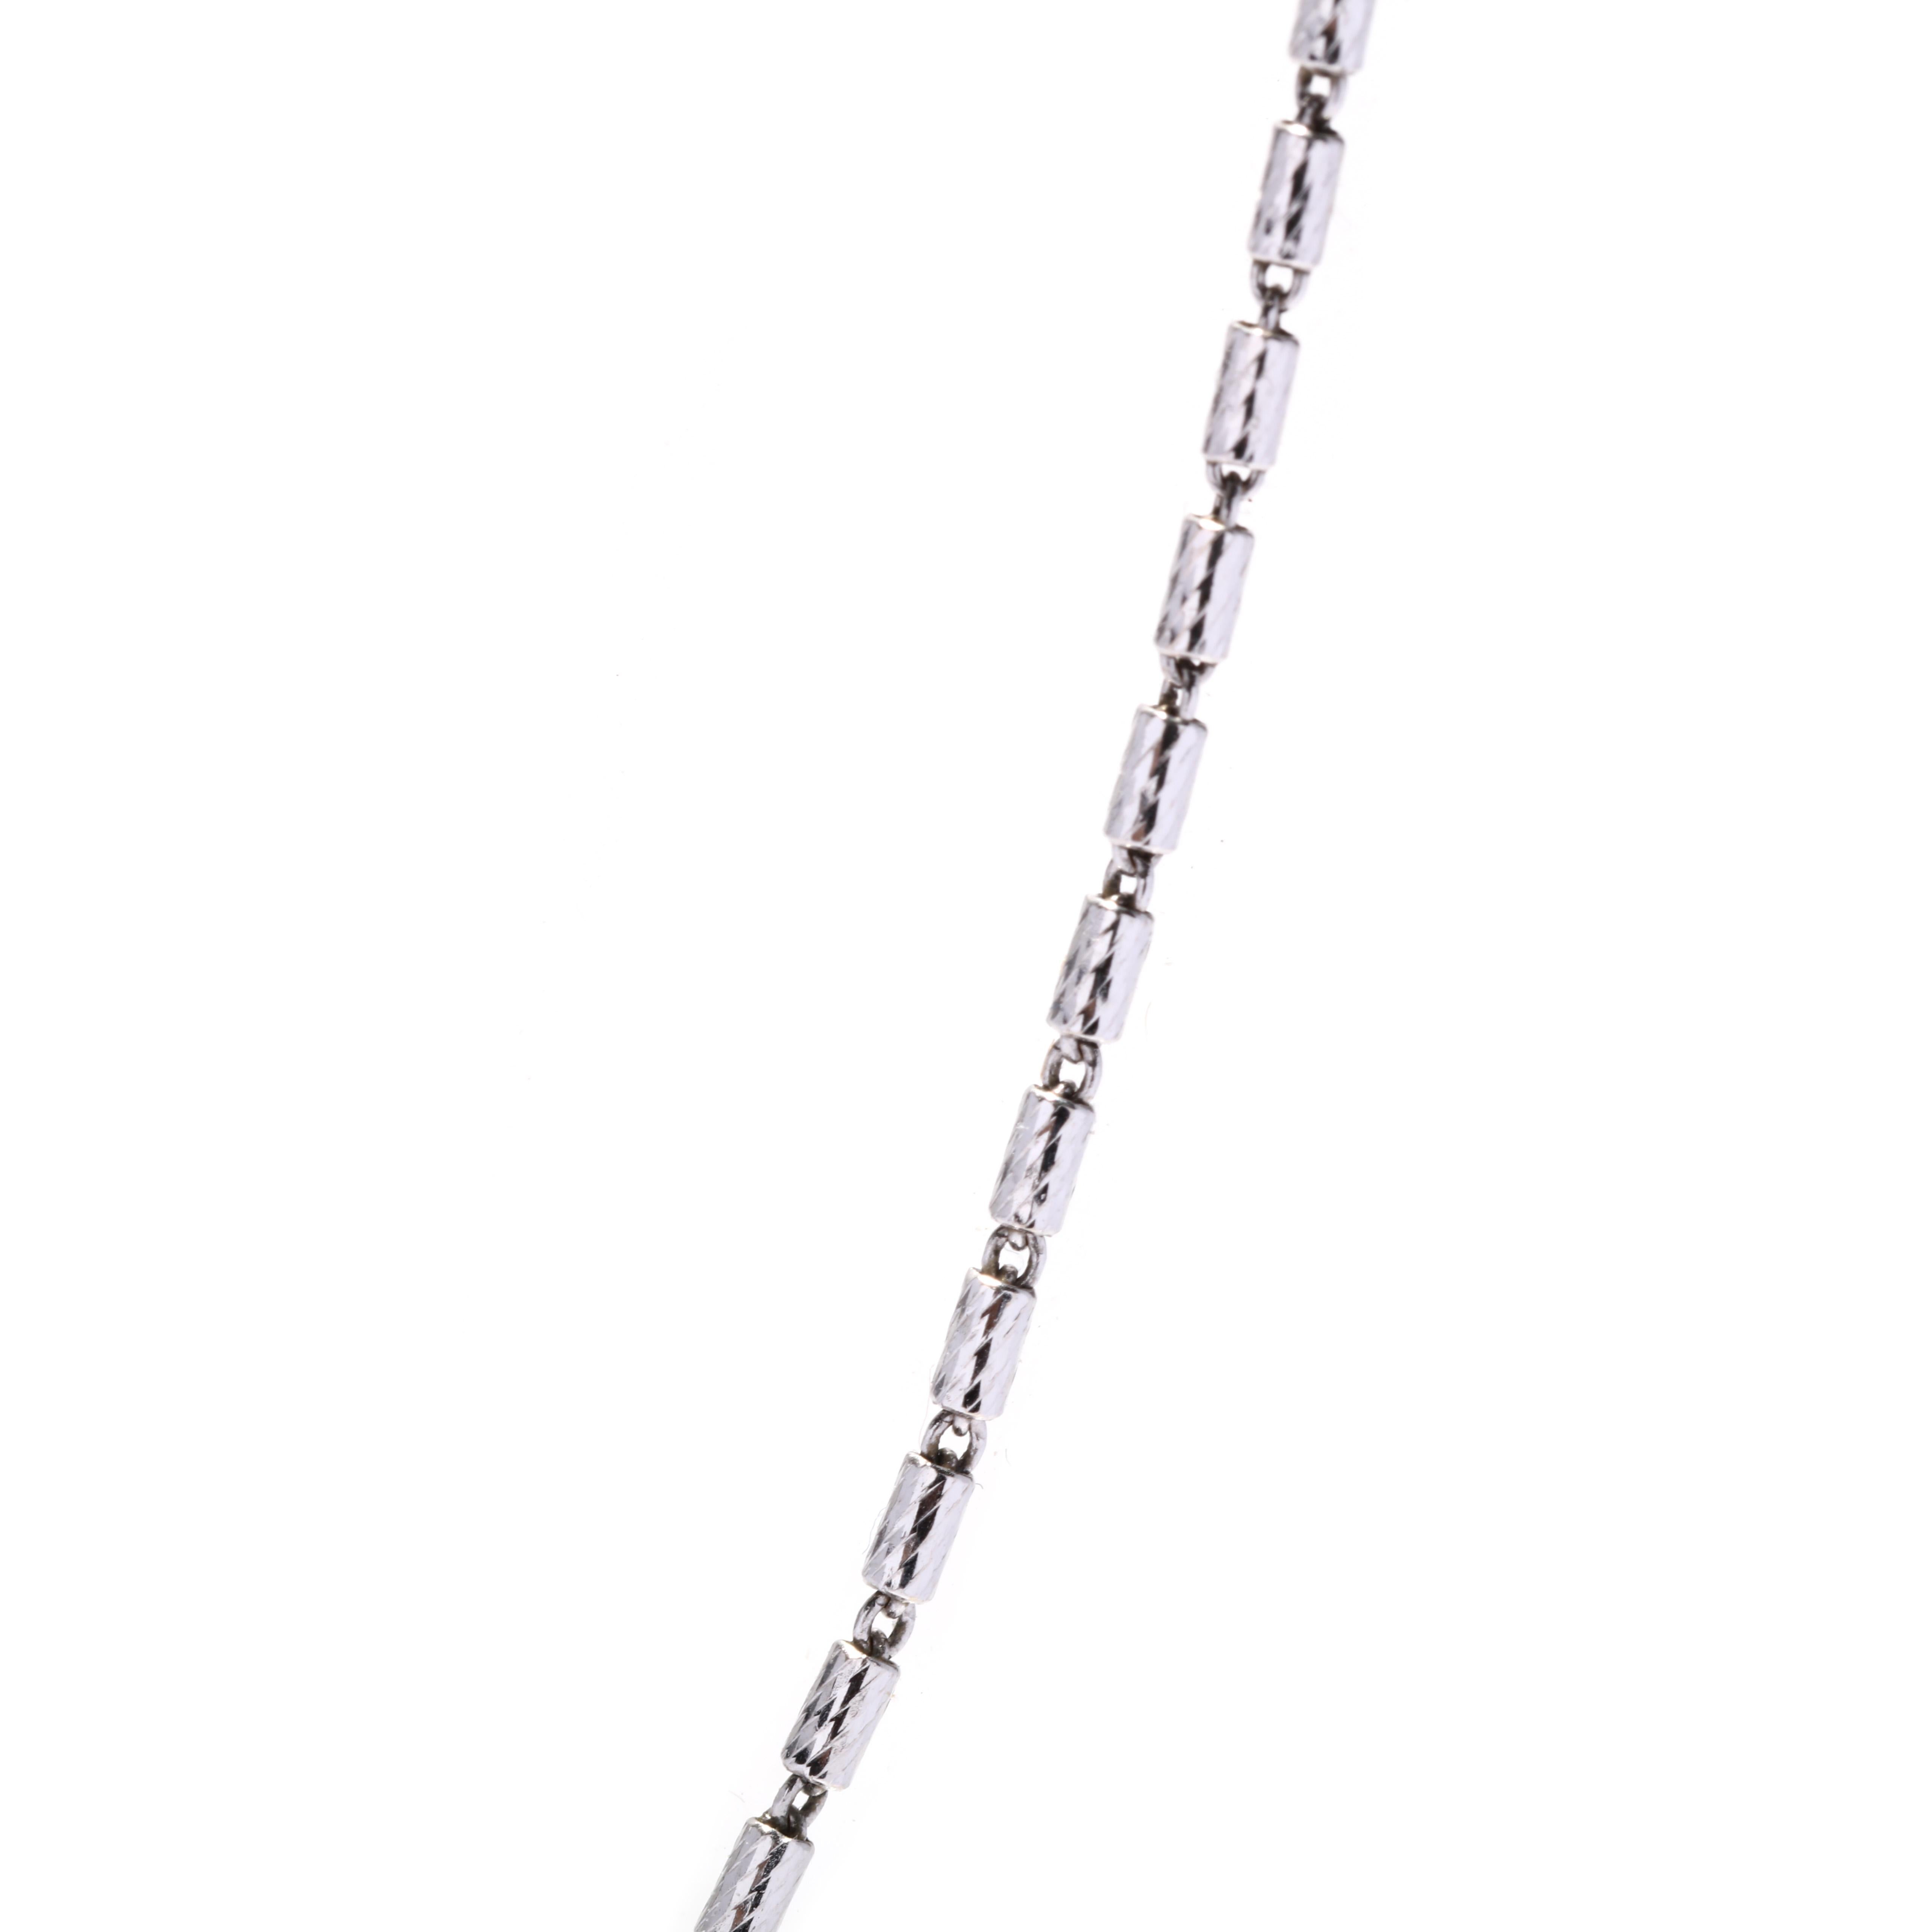 A vintage 14 karat white gold Italian textured barrel bead chain. This thin pendant chain features small elongated barrel beads with a textured finish and with a straight lobster clasp.

Length: 18.25 in.

Width: 1.2 mm

Weight: 2.3 dwts. / 3.6